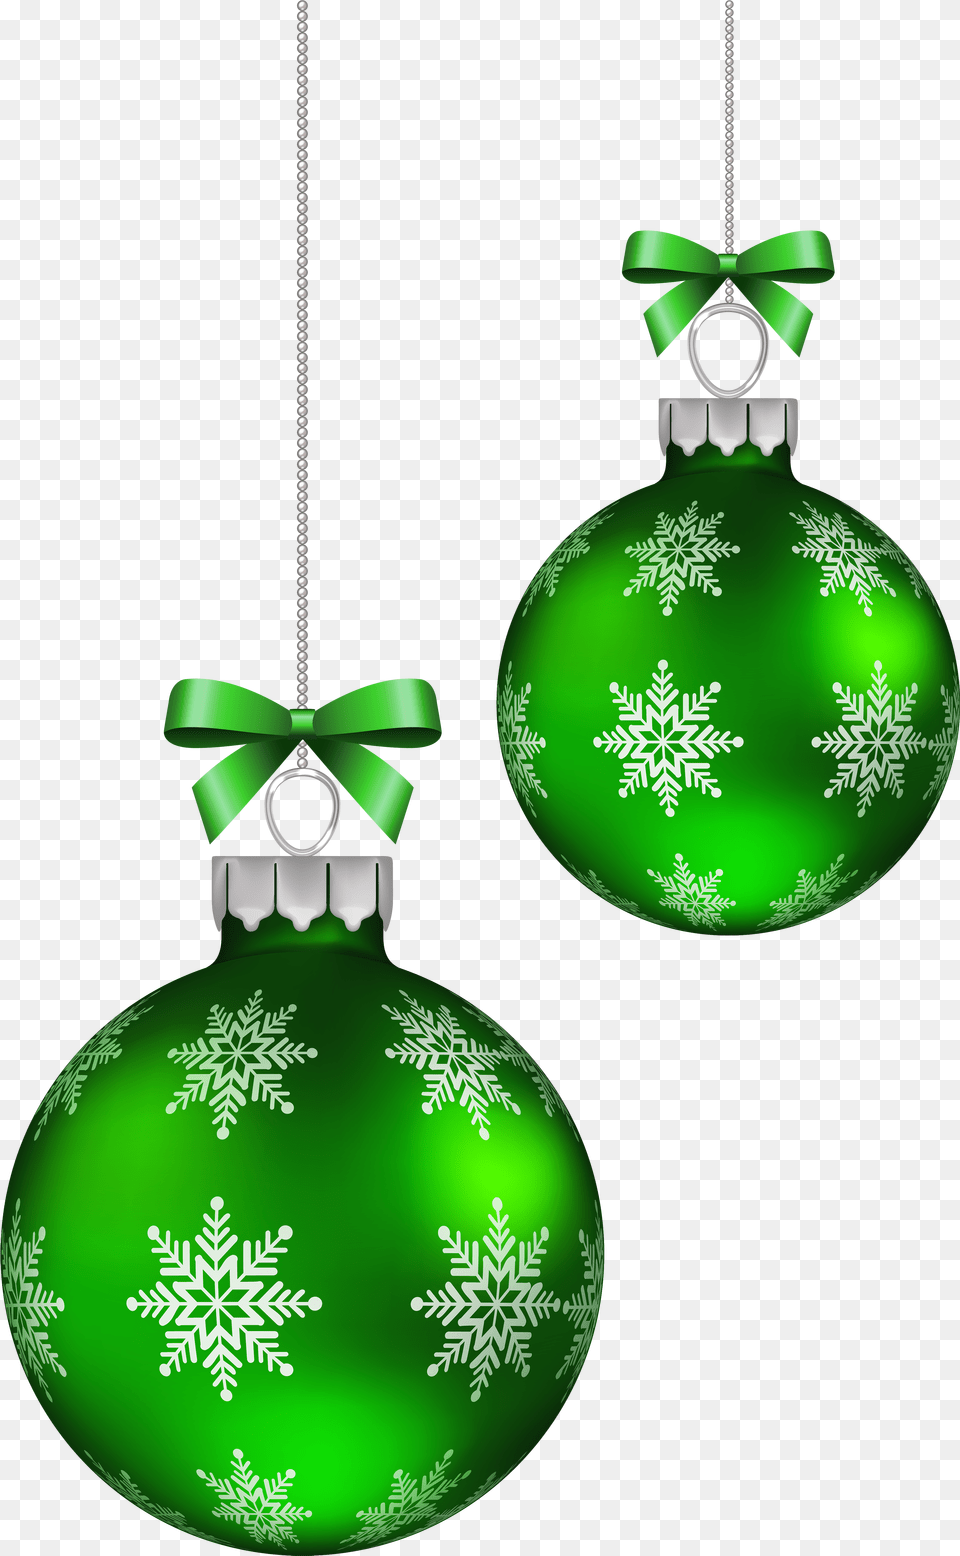 Green Christmas Balls Decoration Clipart Christmas Ornaments Transparent Background, Accessories, Ornament, Jewelry, Gemstone Free Png